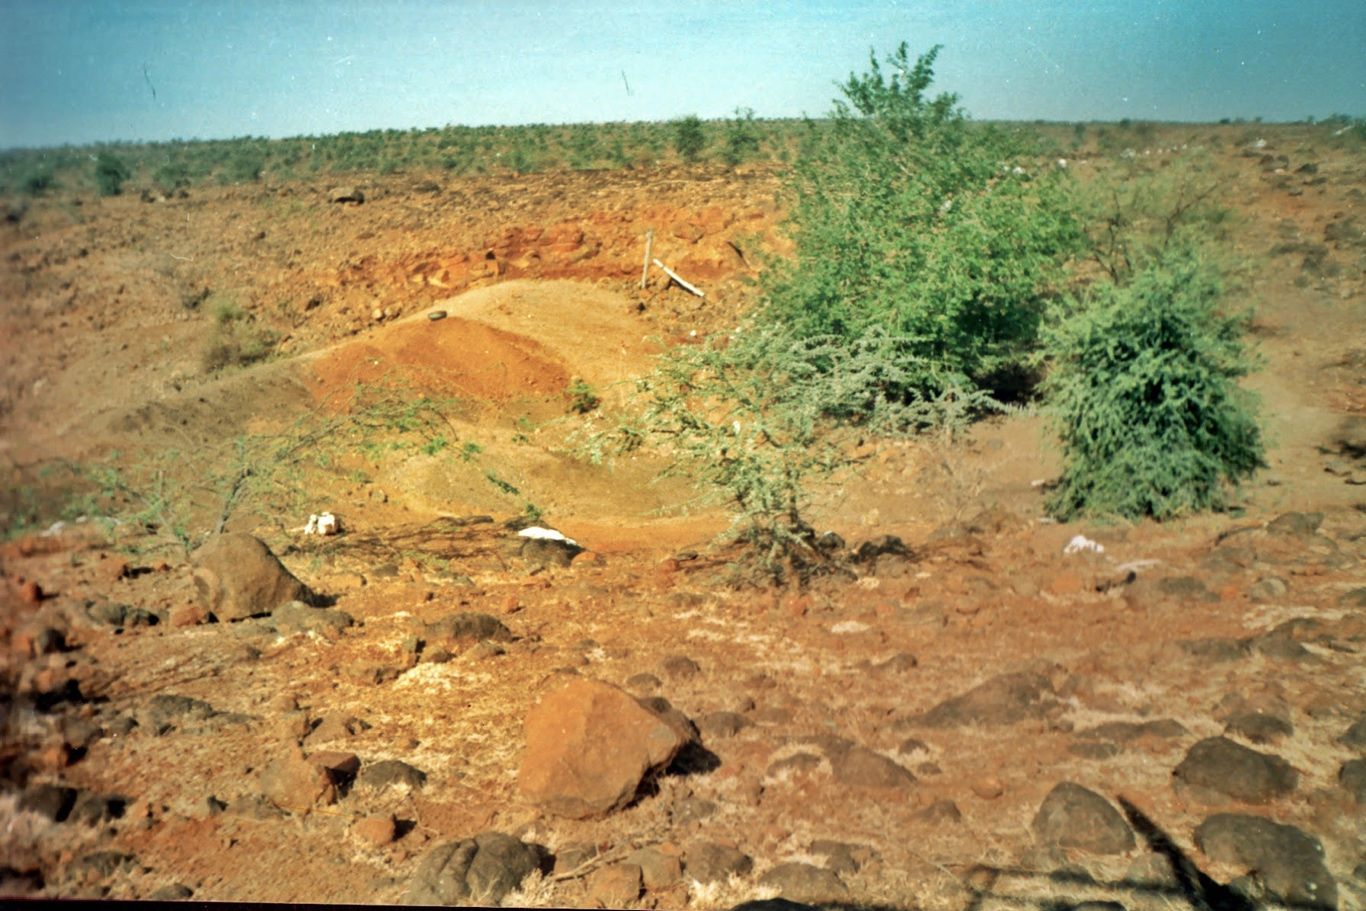 A rocky, red earth barren landscape with a few green trees in Lamkani, India.